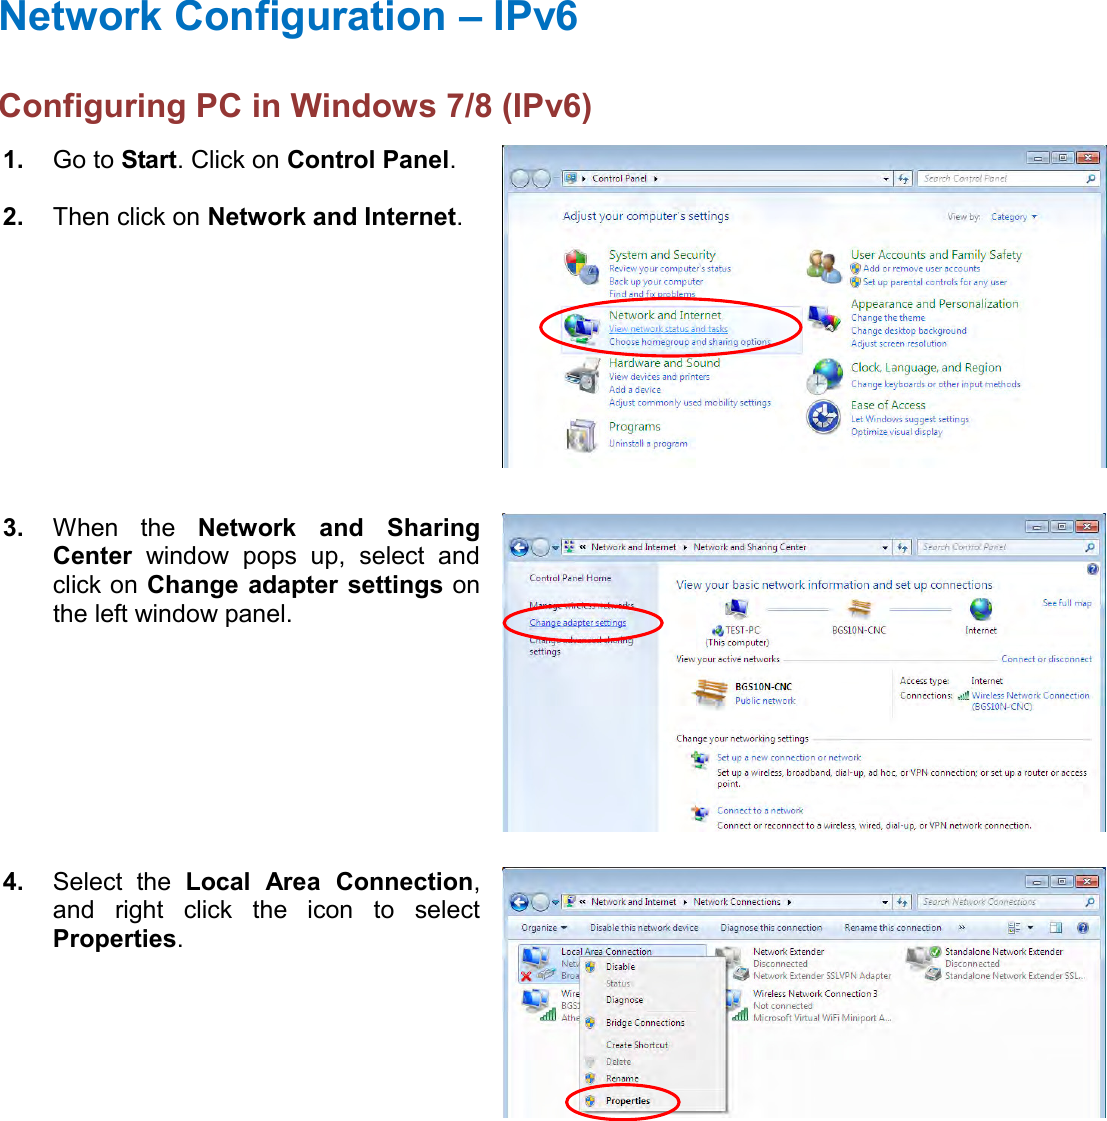    Network Configuration – IPv6 Configuring PC in Windows 7/8 (IPv6)  1. Go to Start. Click on Control Panel.  2. Then click on Network and Internet.  3. When  the  Network  and  Sharing Center  window  pops  up,  select  and click on Change  adapter settings on the left window panel.  4. Select  the  Local  Area  Connection, and  right  click  the  icon  to  select Properties.  